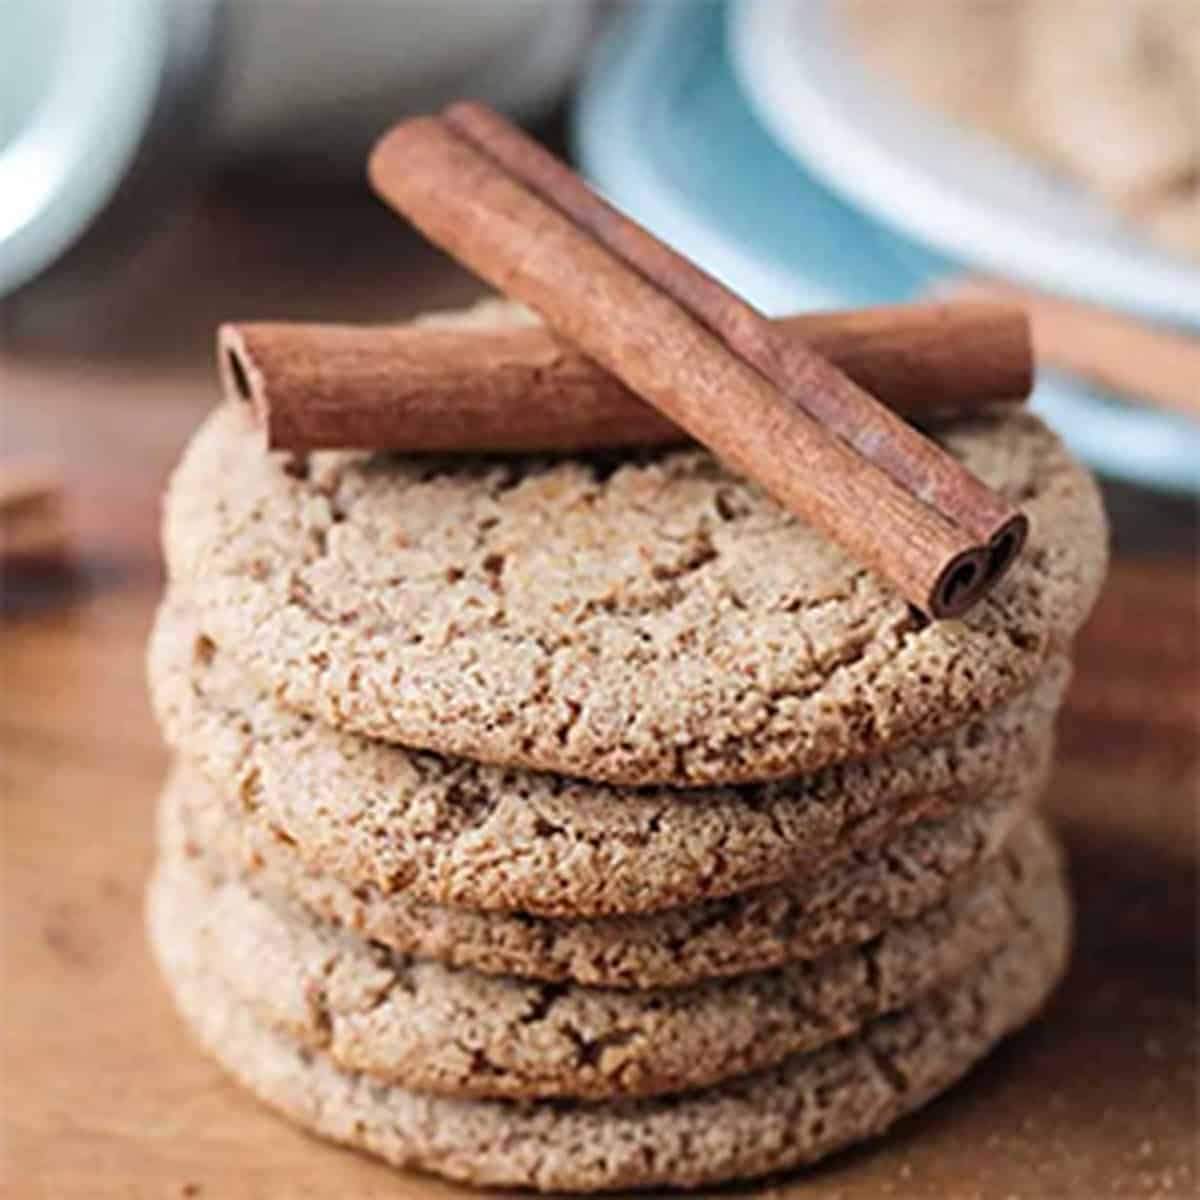 A stack of light brown cookies with cinnamon sticks on top.